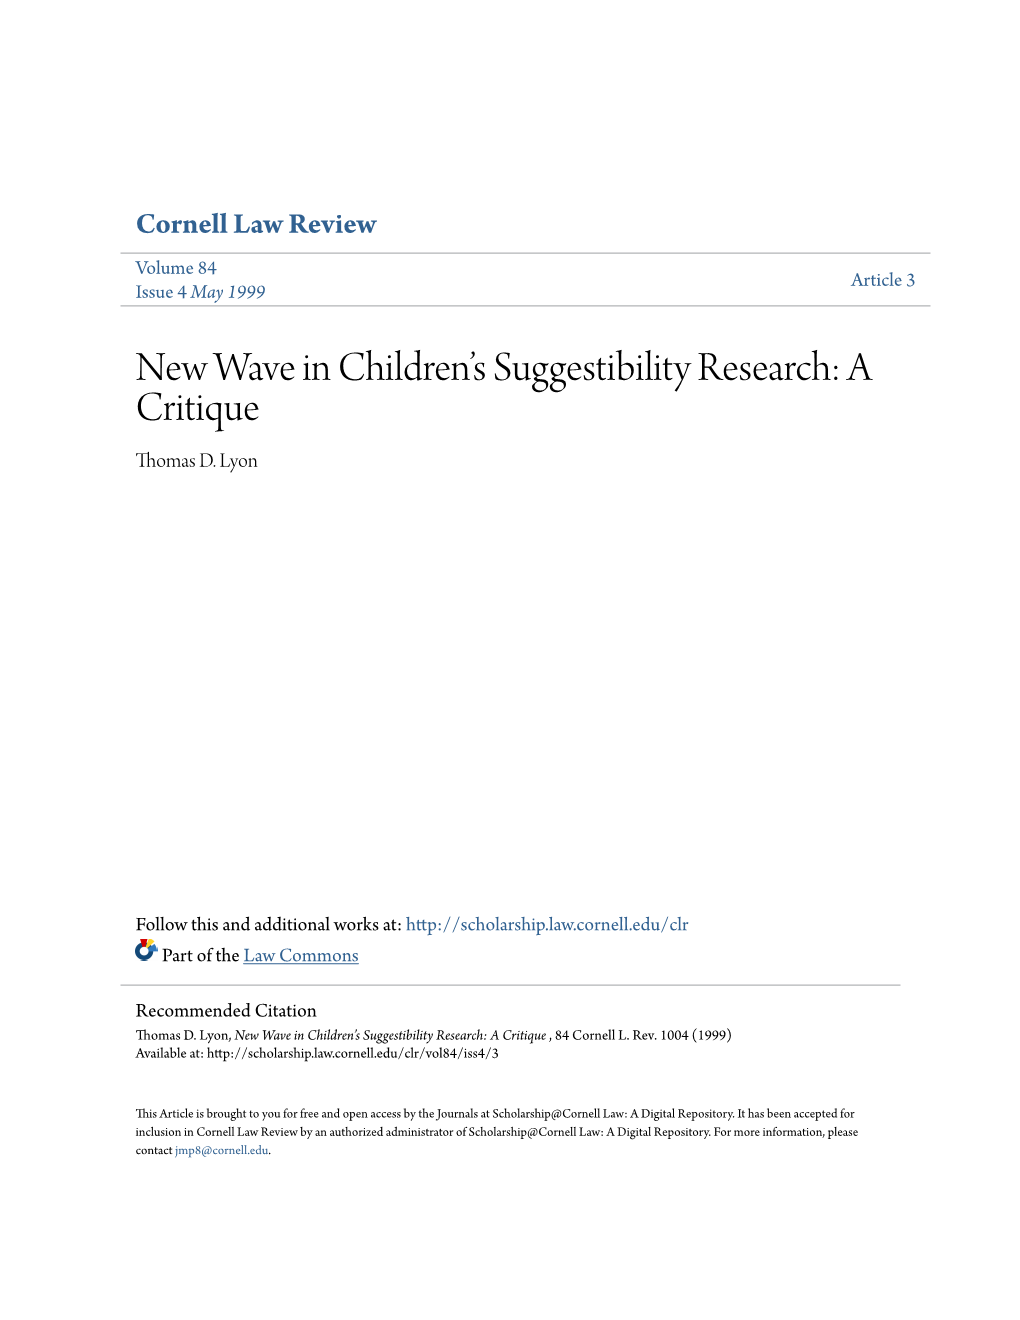 New Wave in Children's Suggestibility Research: a Critique